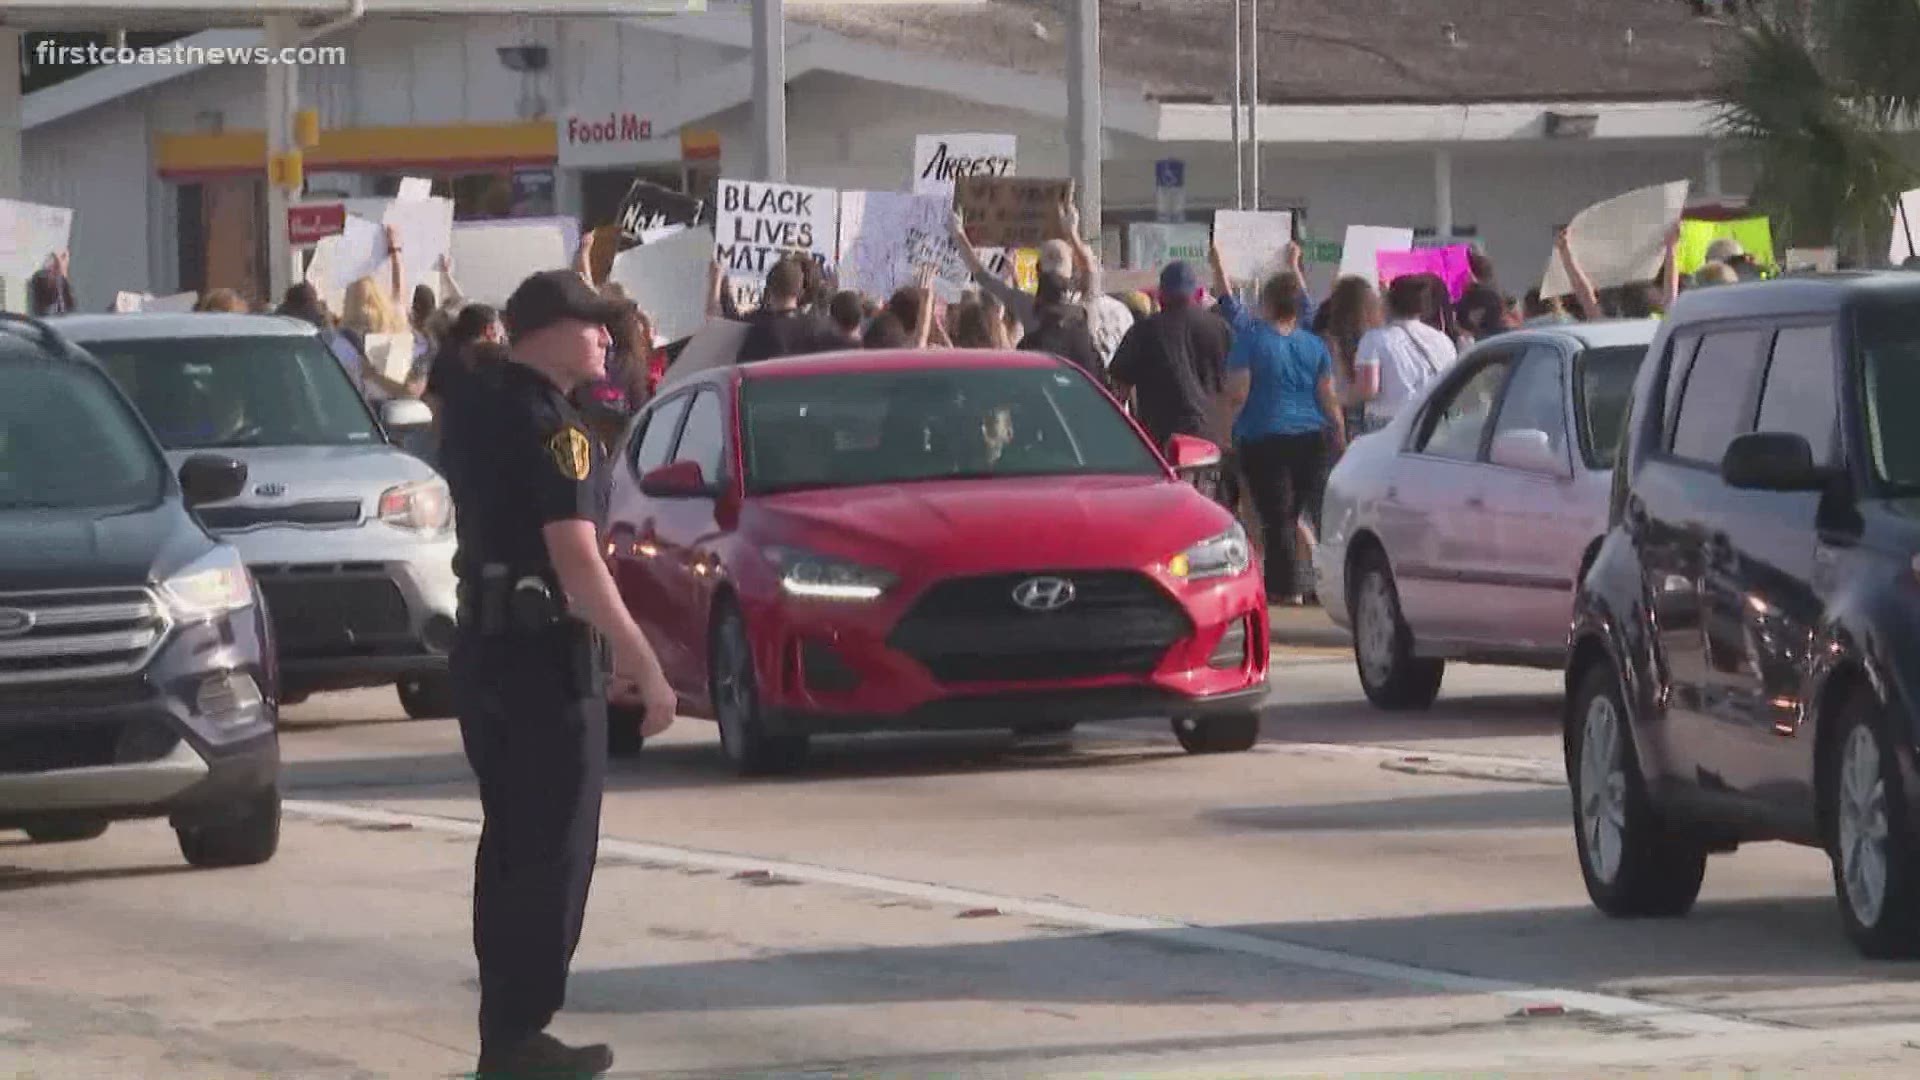 A group of about 200 protesters is walking along U.S. 1 in St. Augustine, demonstrating against police brutality.